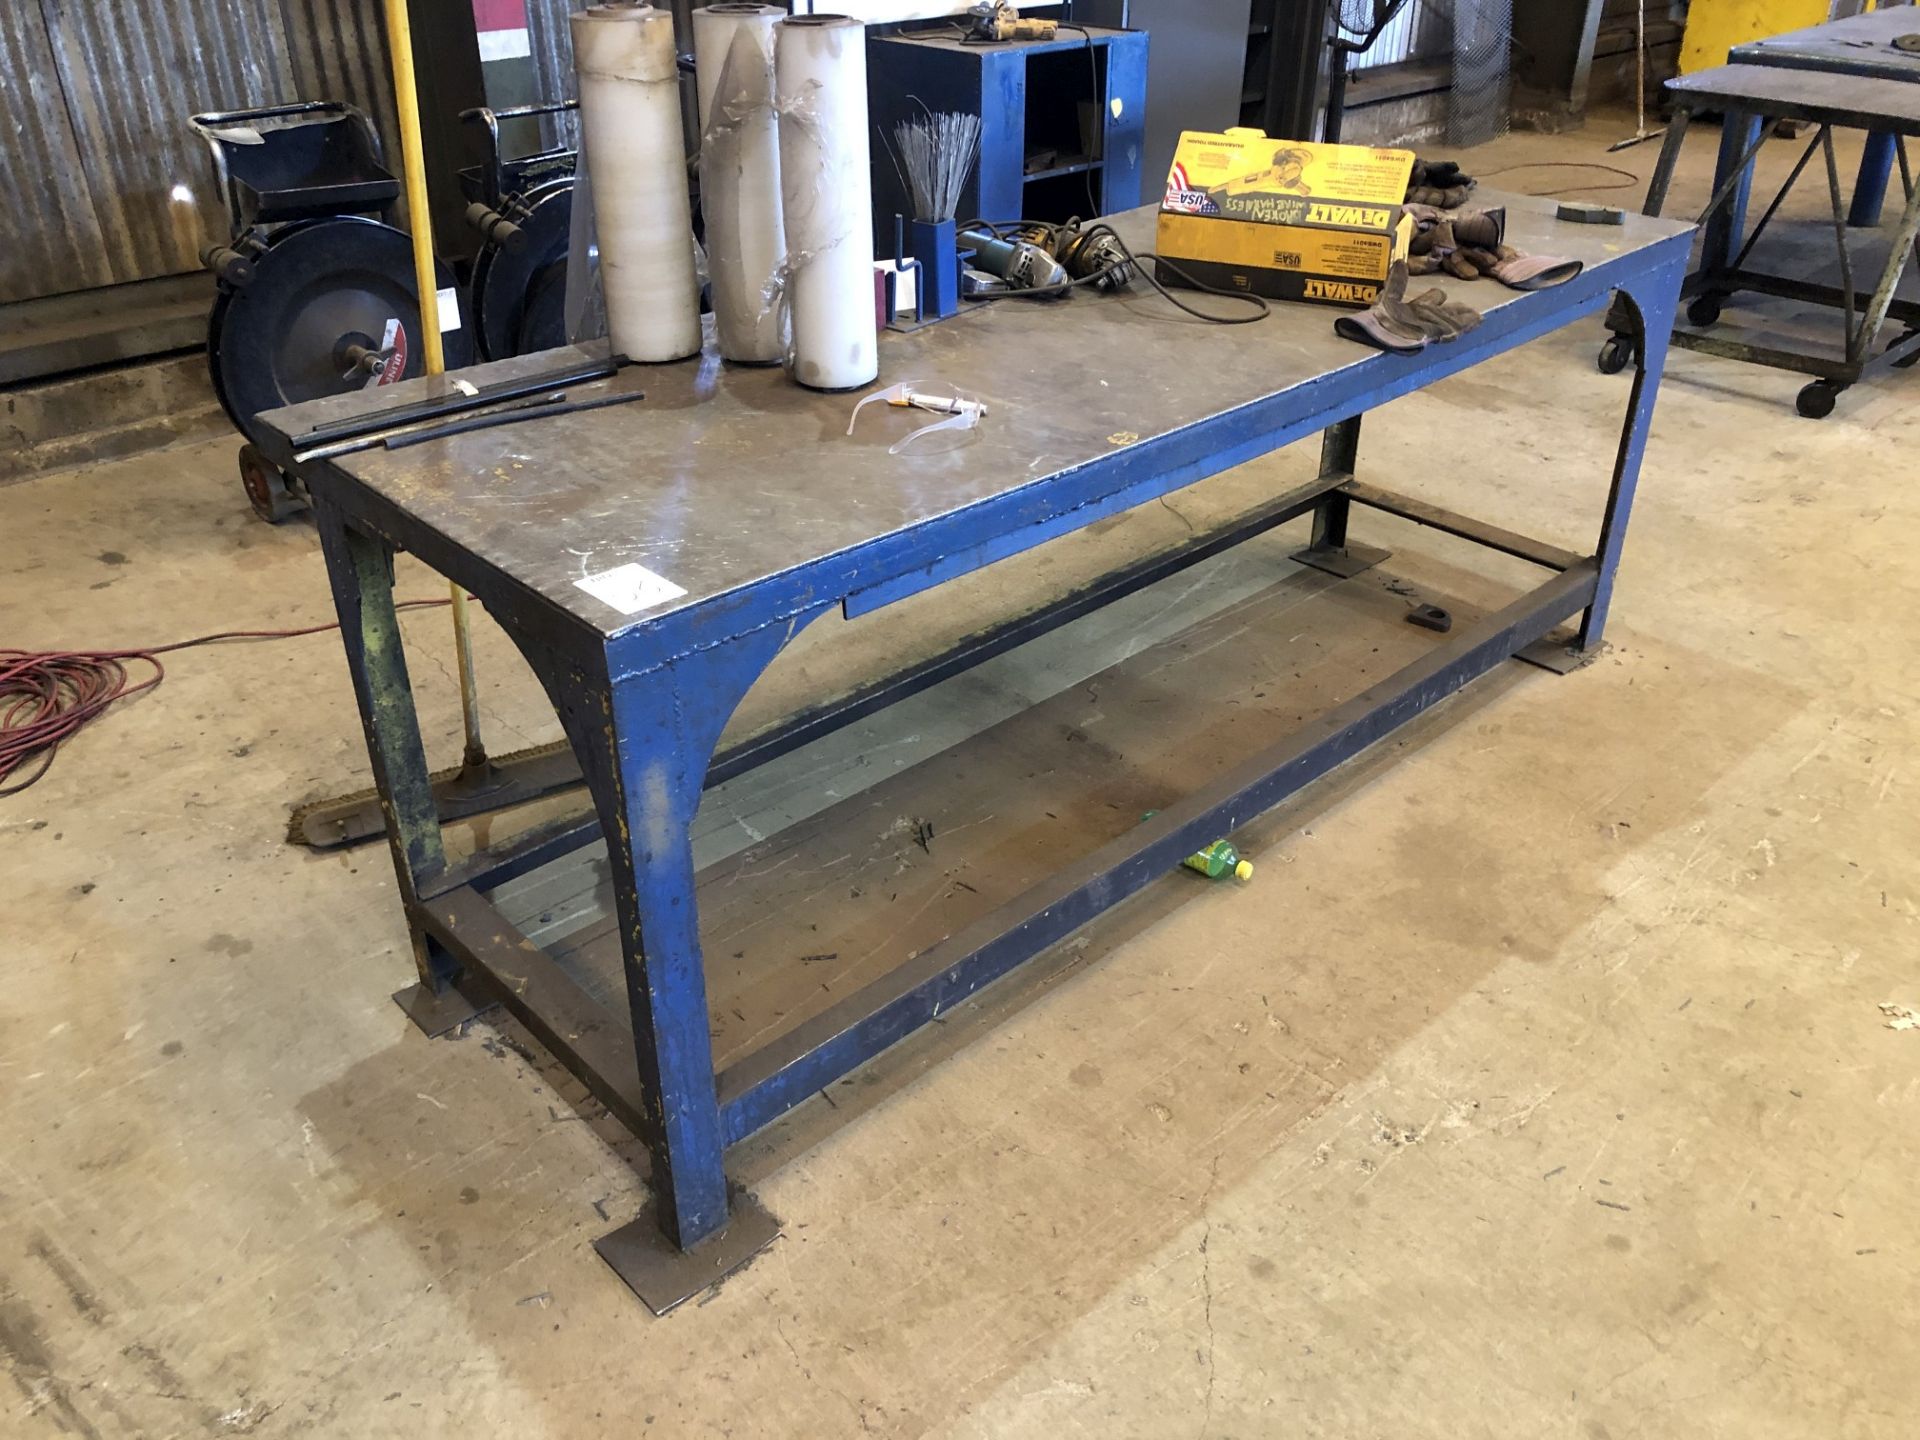 34" x 7'-10" Metal Table (No Contents) [Located at 8830 Vineyard Avenue, Rancho Cucamonga, CA - Image 2 of 2